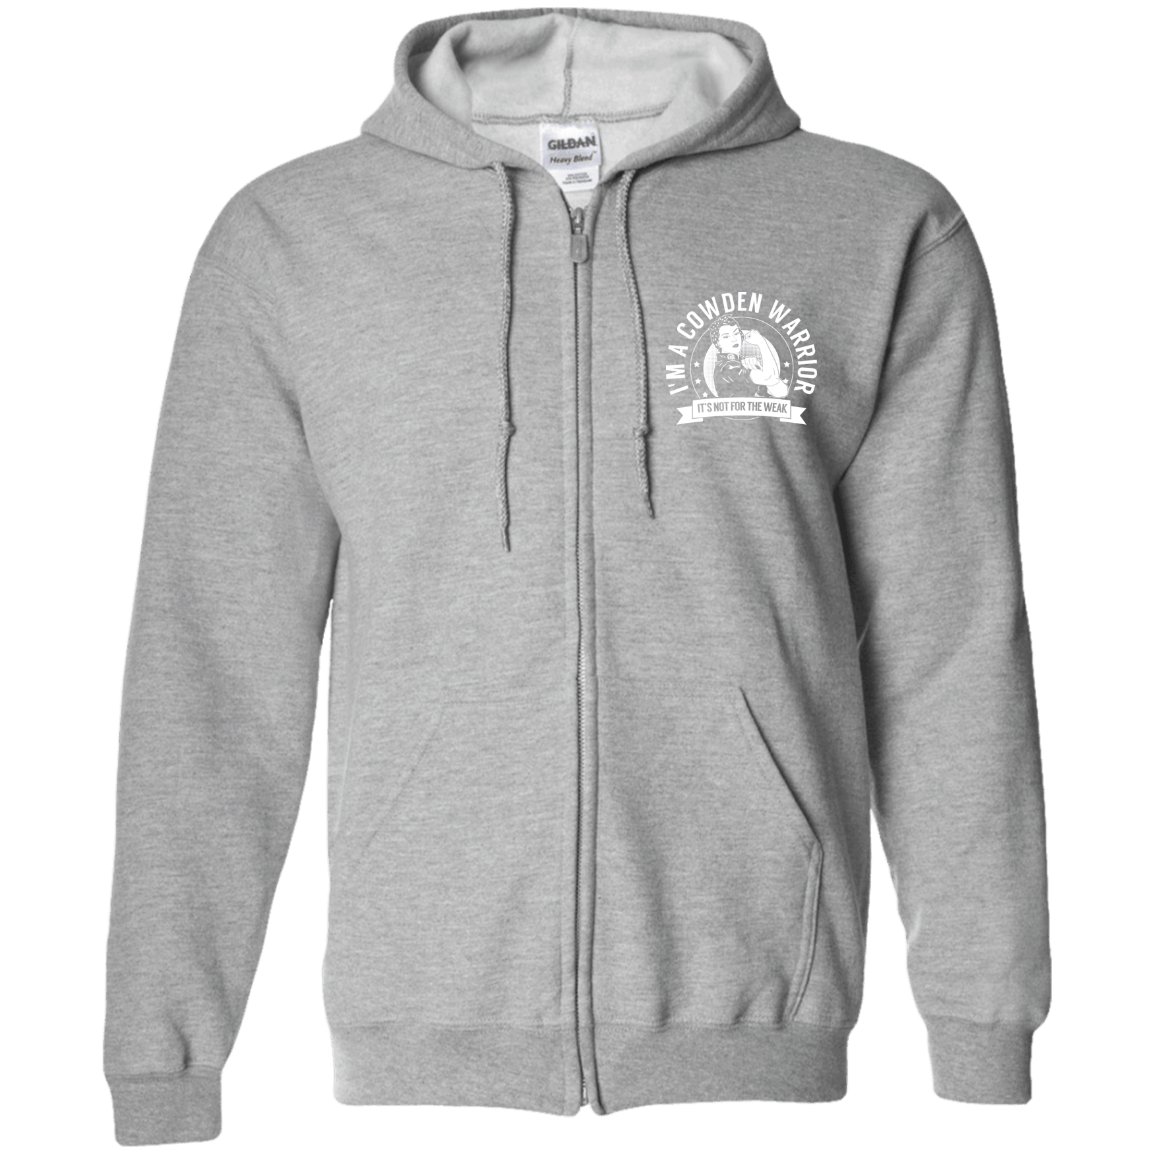 Cowden Syndrome - Cowden Warrior NFTW Zip Up Hooded Sweatshirt - The Unchargeables